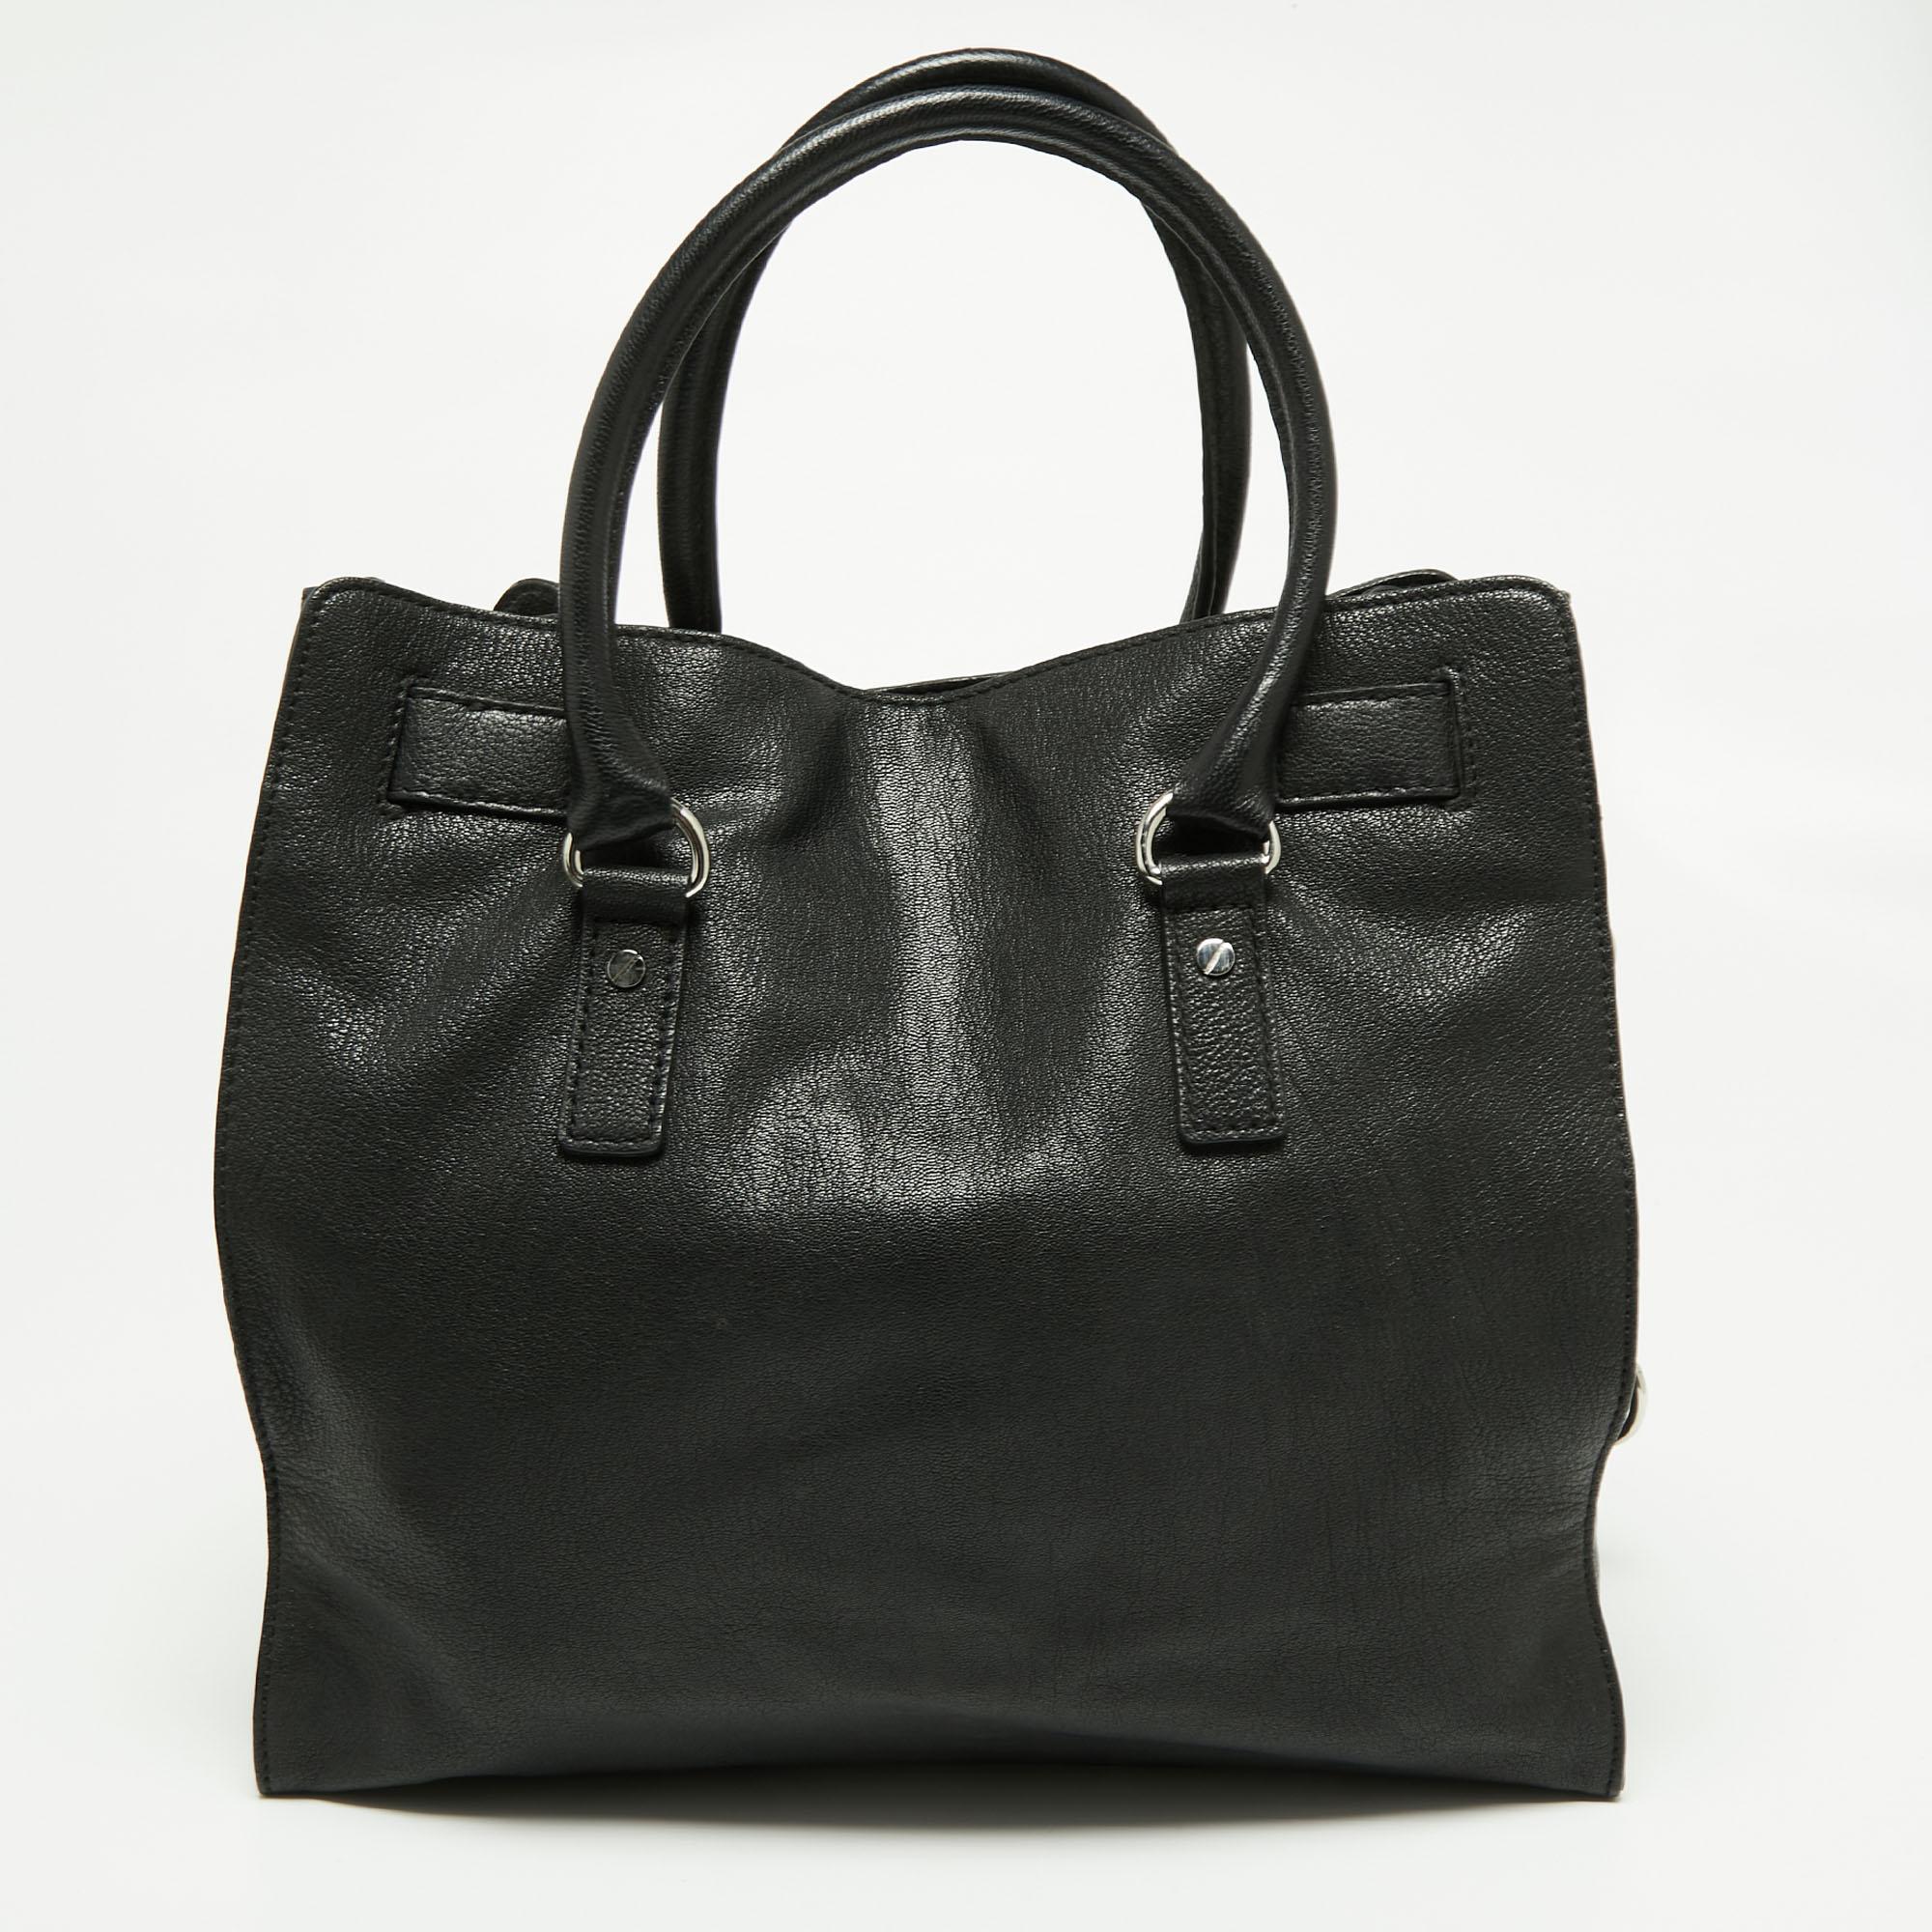 This stylish Hamilton North South tote comes from MICHAEL Michael Kors. It is crafted from black leather and is decorated with a silver-toned logo-engraved padlock on the front. It features two handles and a nylon-lined interior. This creation is